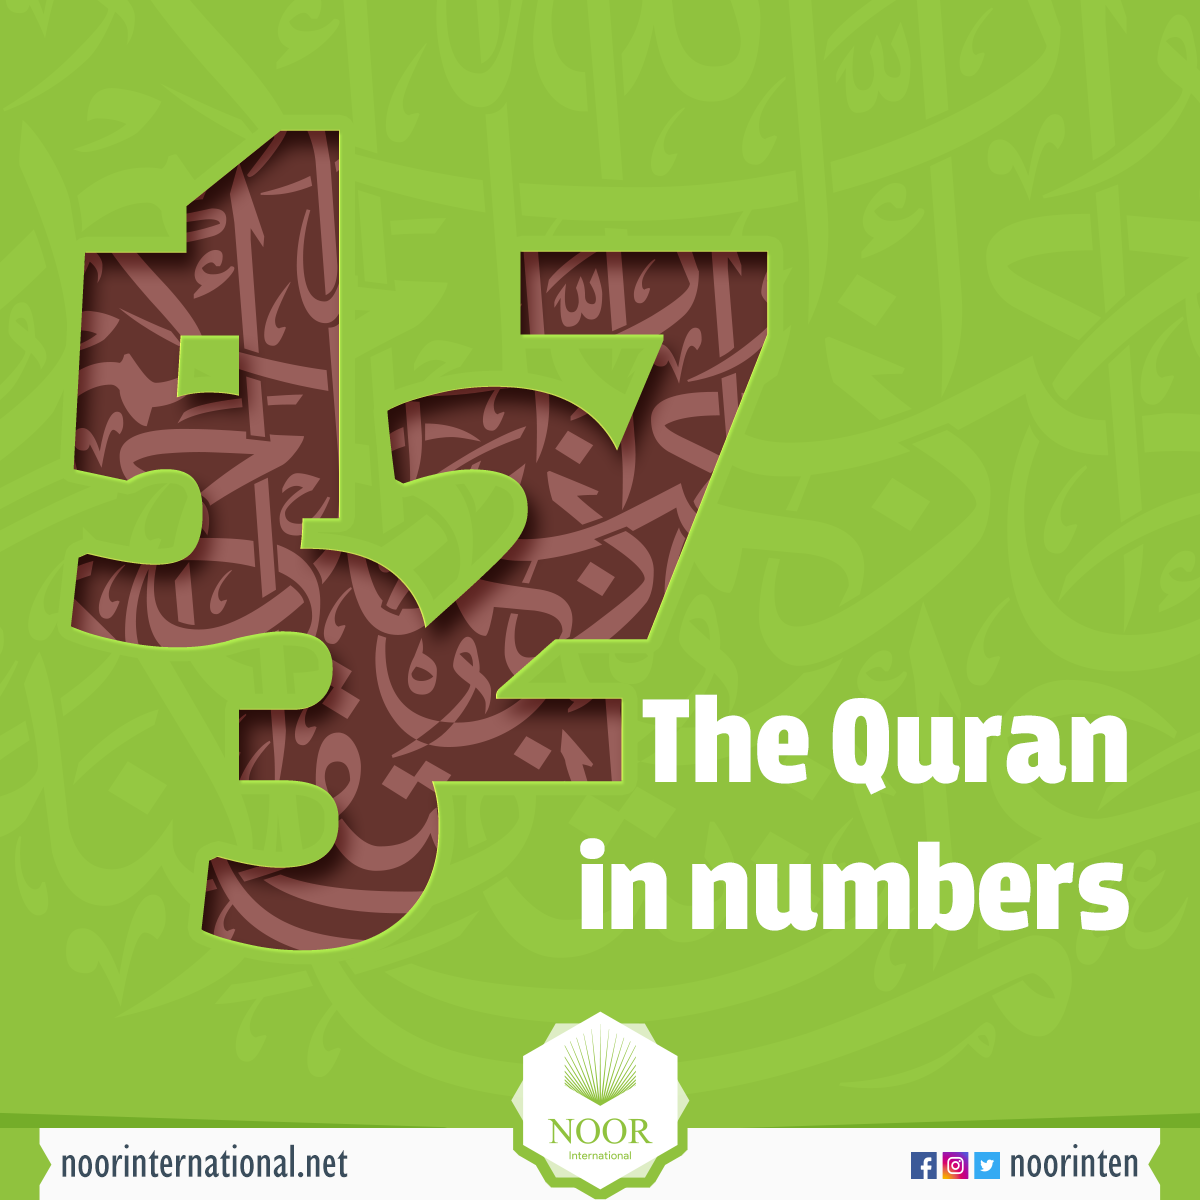 What do you know about the Qur’an? for Muslims